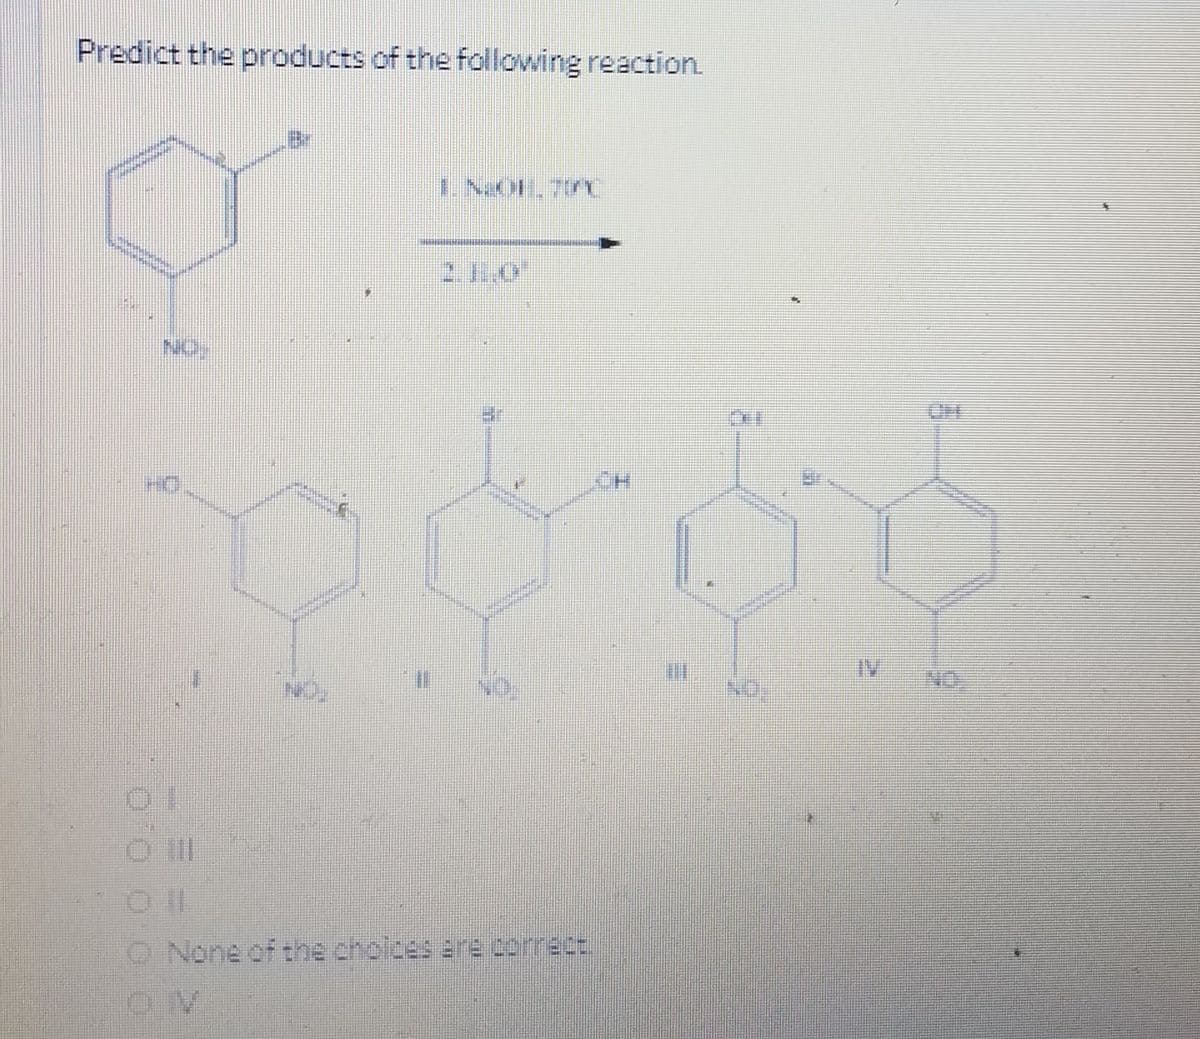 Predict the products of the following reaction.
I NOH 70C
2.10
IV
NO:
O None of the cholces are correct.
